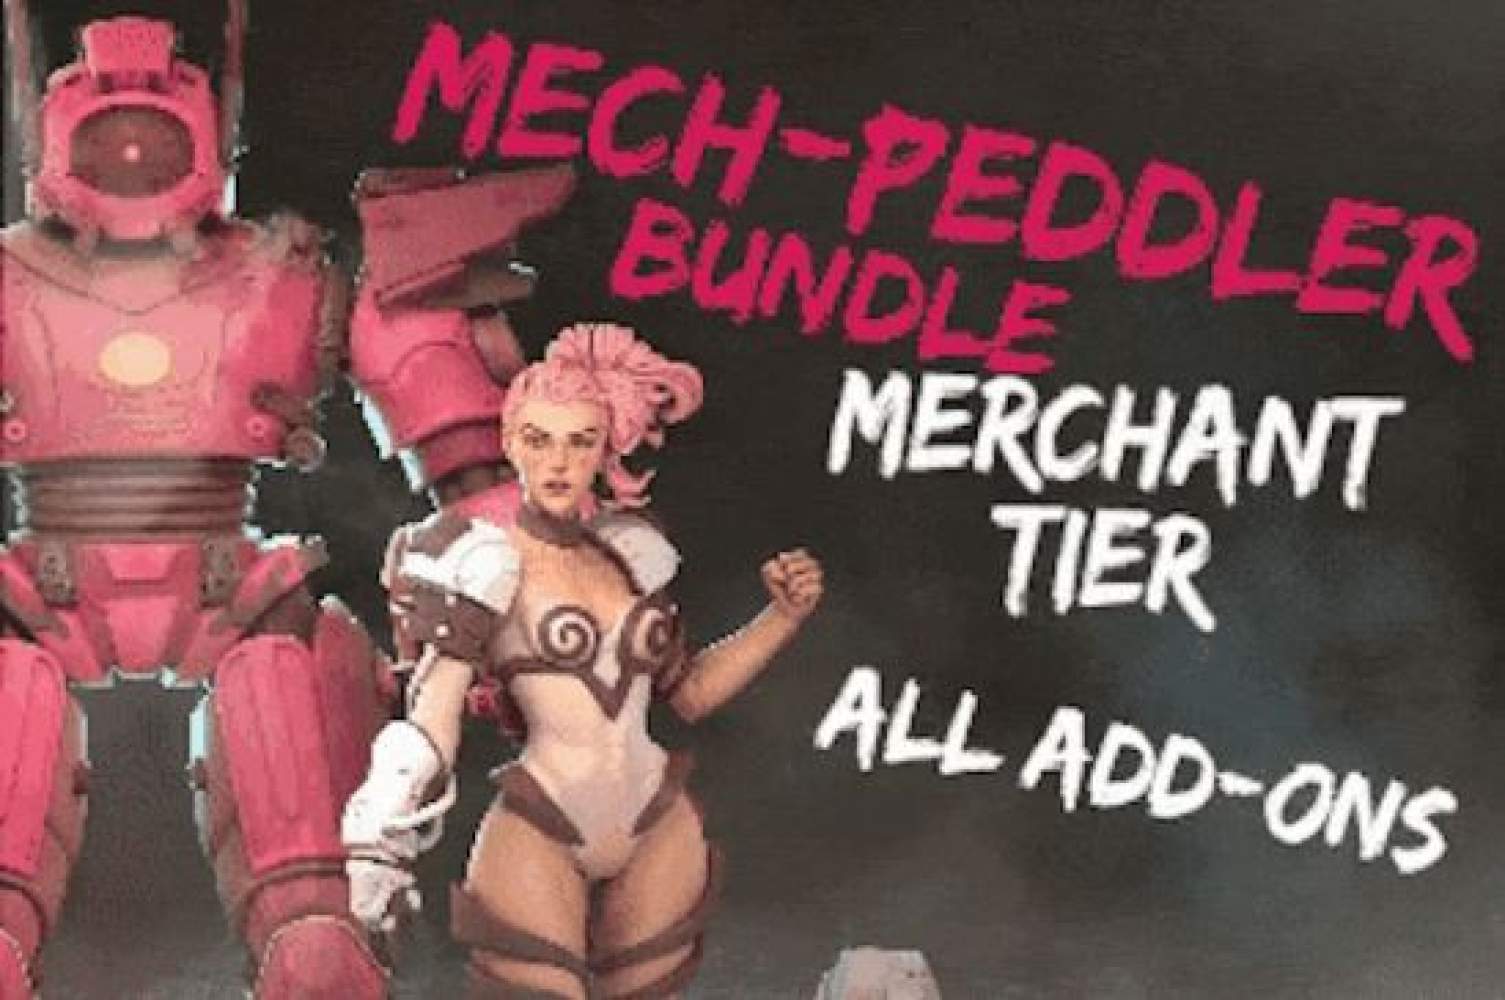 Merchant Bundle: All Add-Ons's Cover